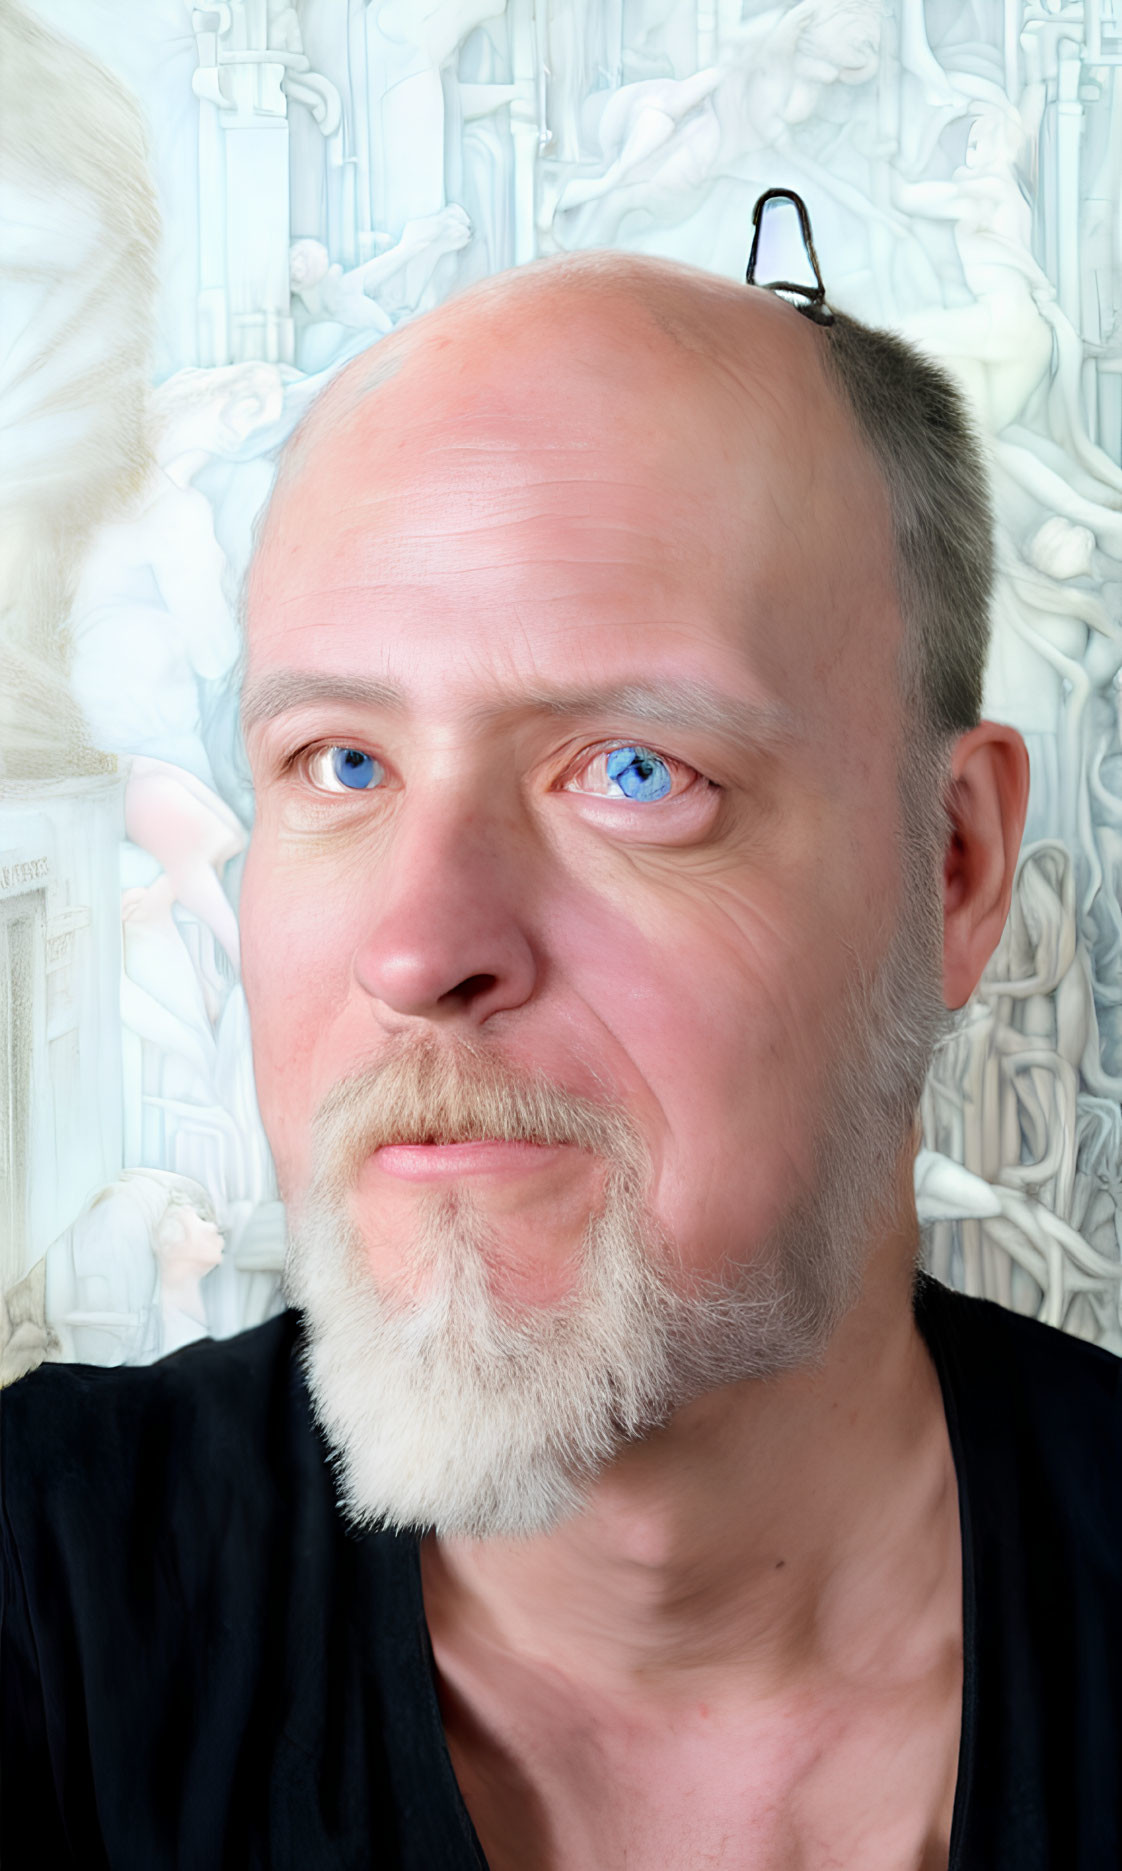 Bald Man with Beard and Blue Eyes in Black Shirt on White Background